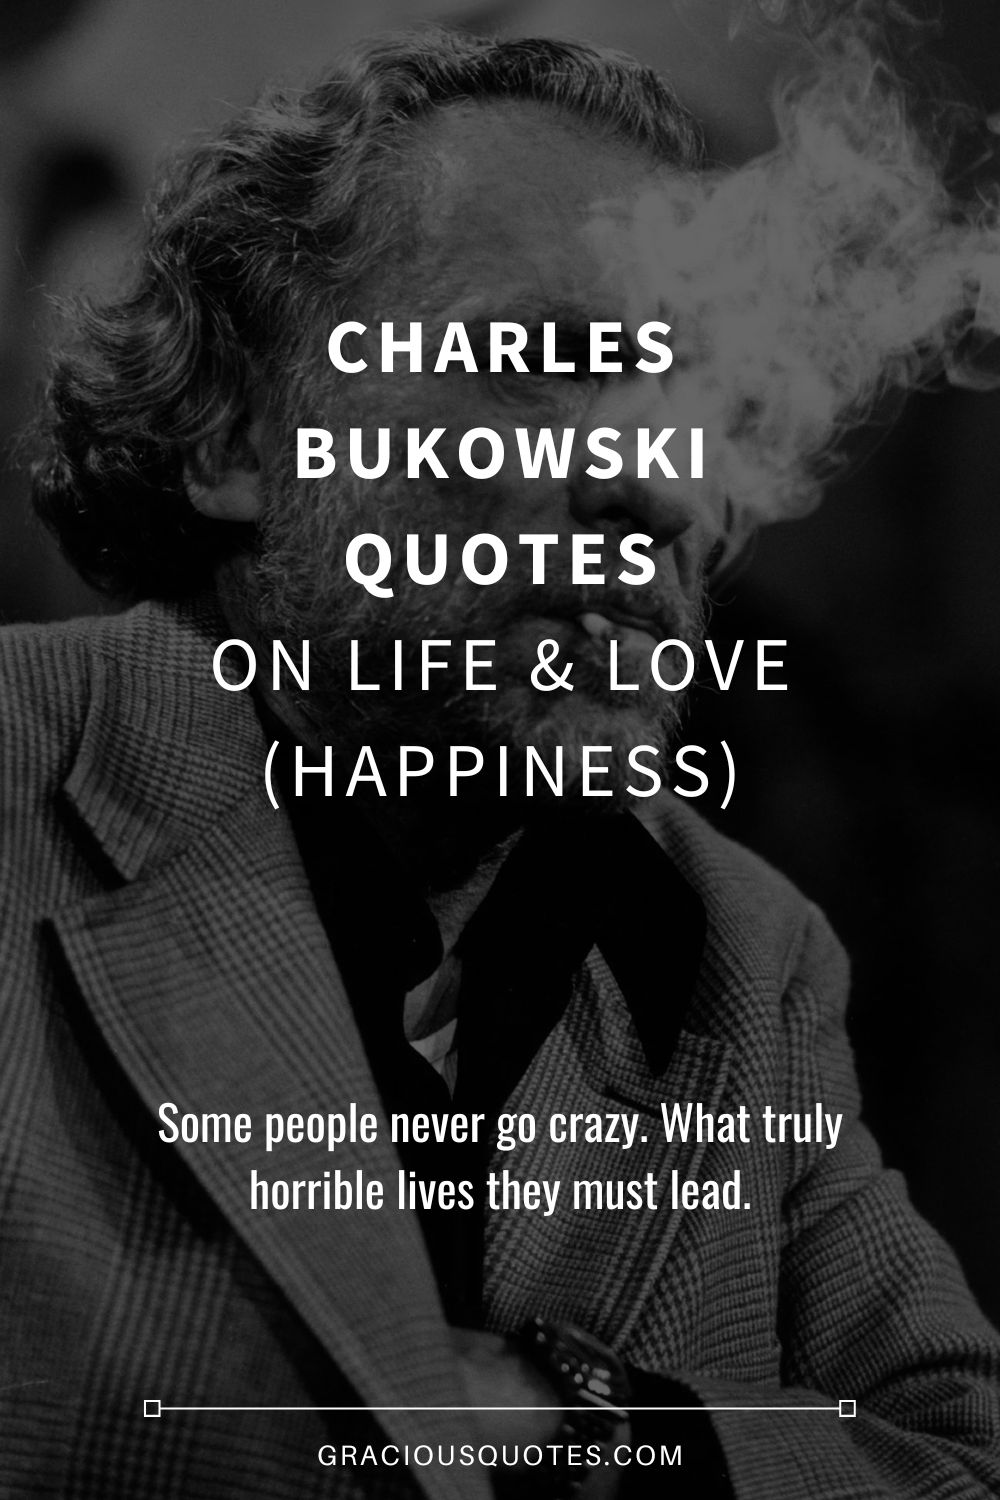 Charles Bukowski Quotes on Life & Love (HAPPINESS) - Gracious Quotes